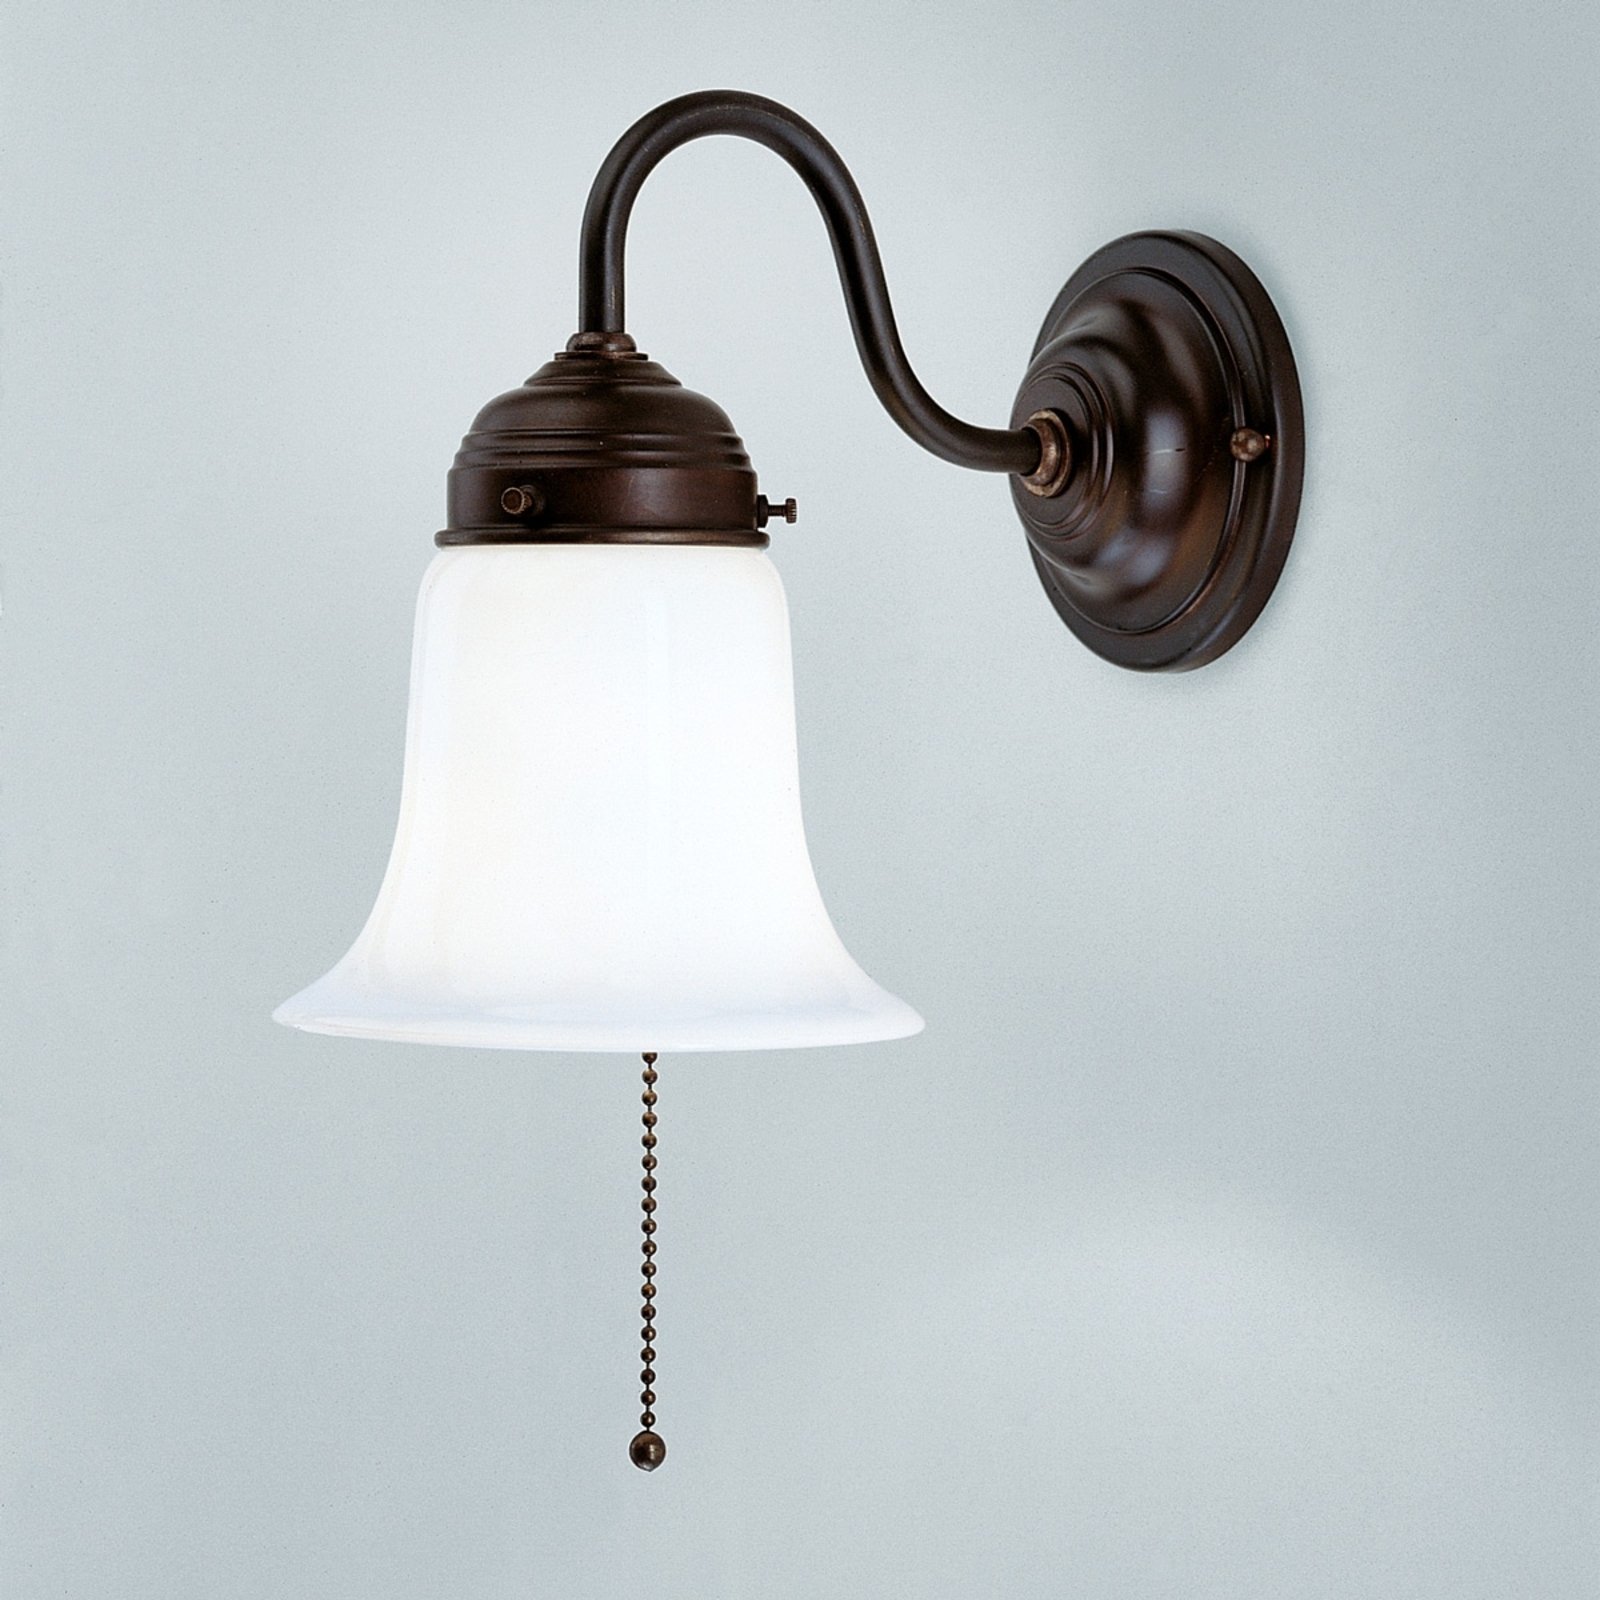 Sibille wall light with antique mount